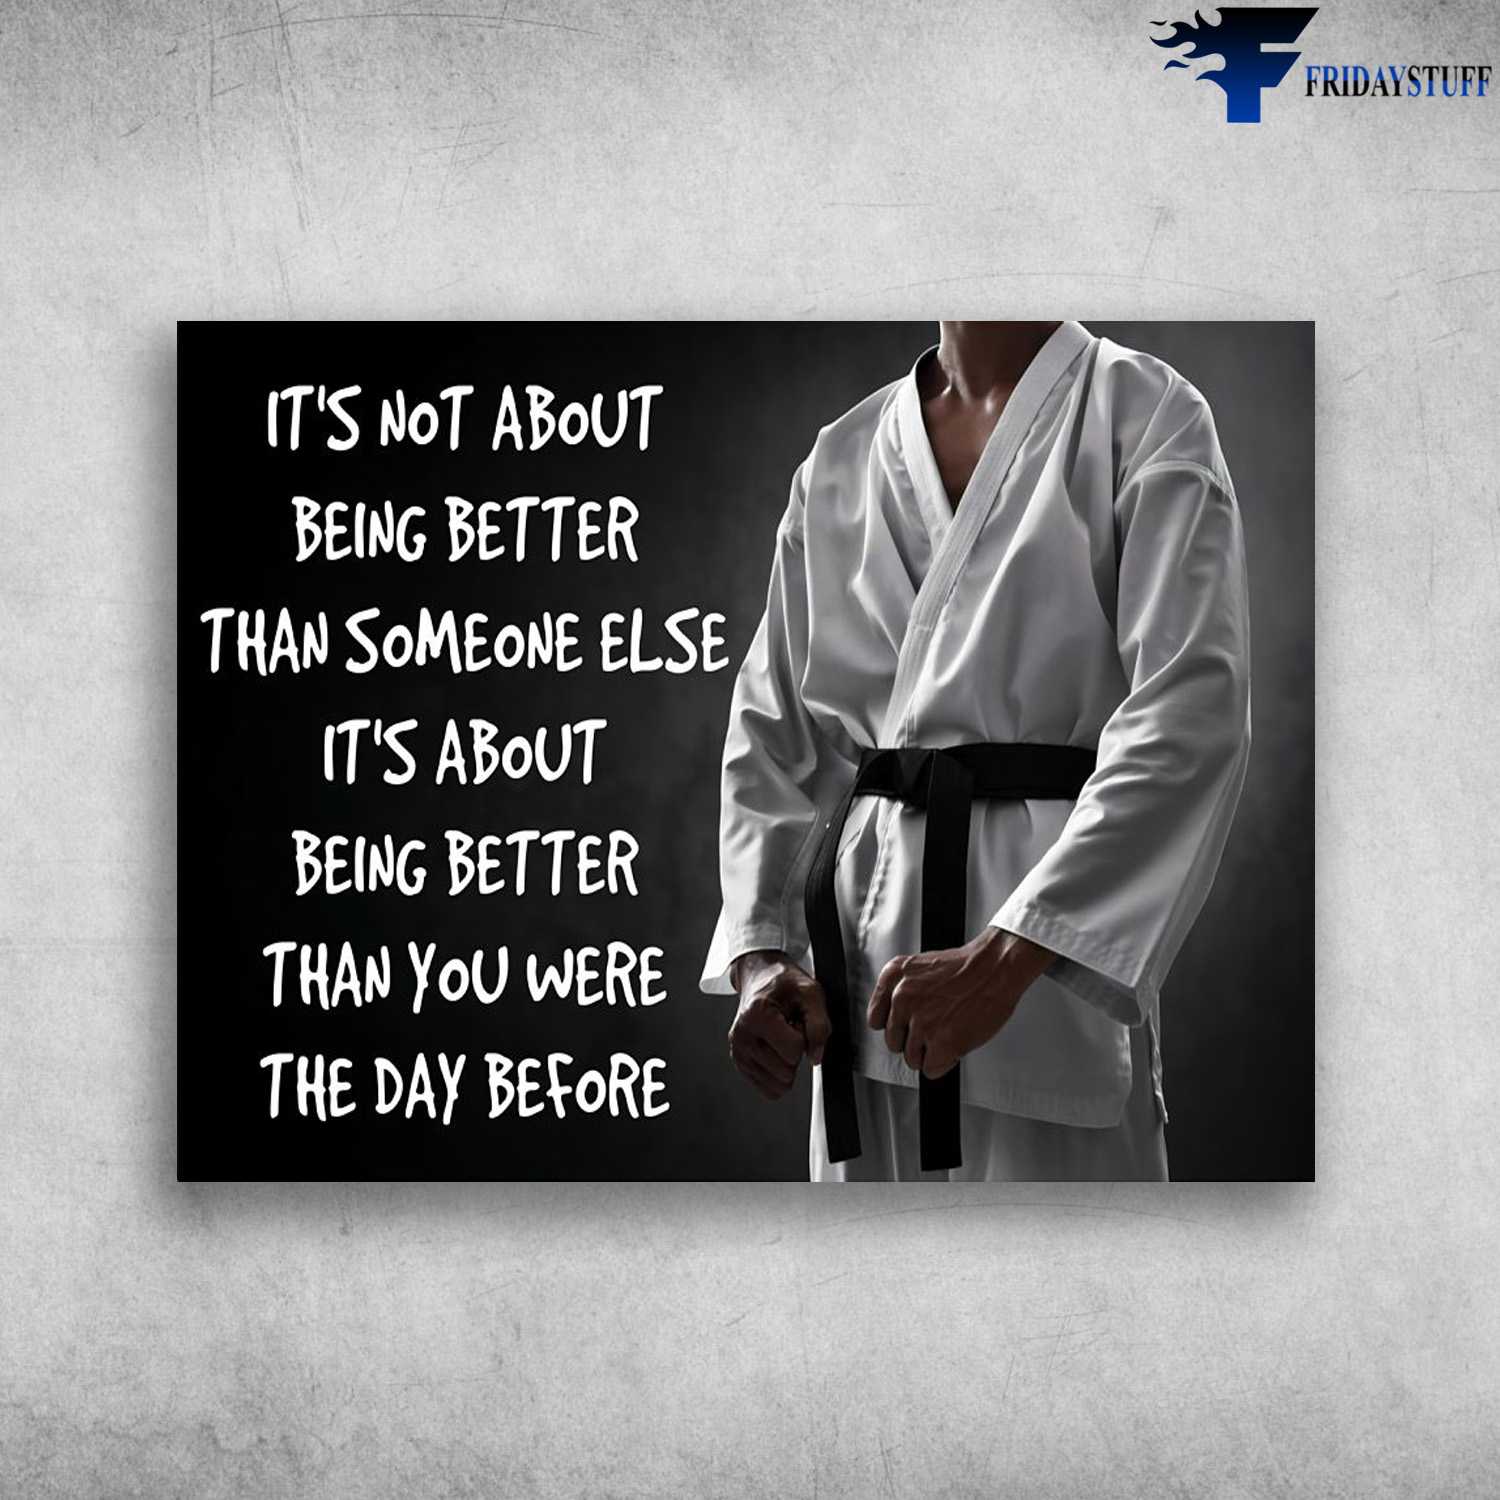 Teakwondo Practice, Teakwondo Poster, It's Not About Being Better Than Someone Else, It About Being Beter Than You Were The Day Before